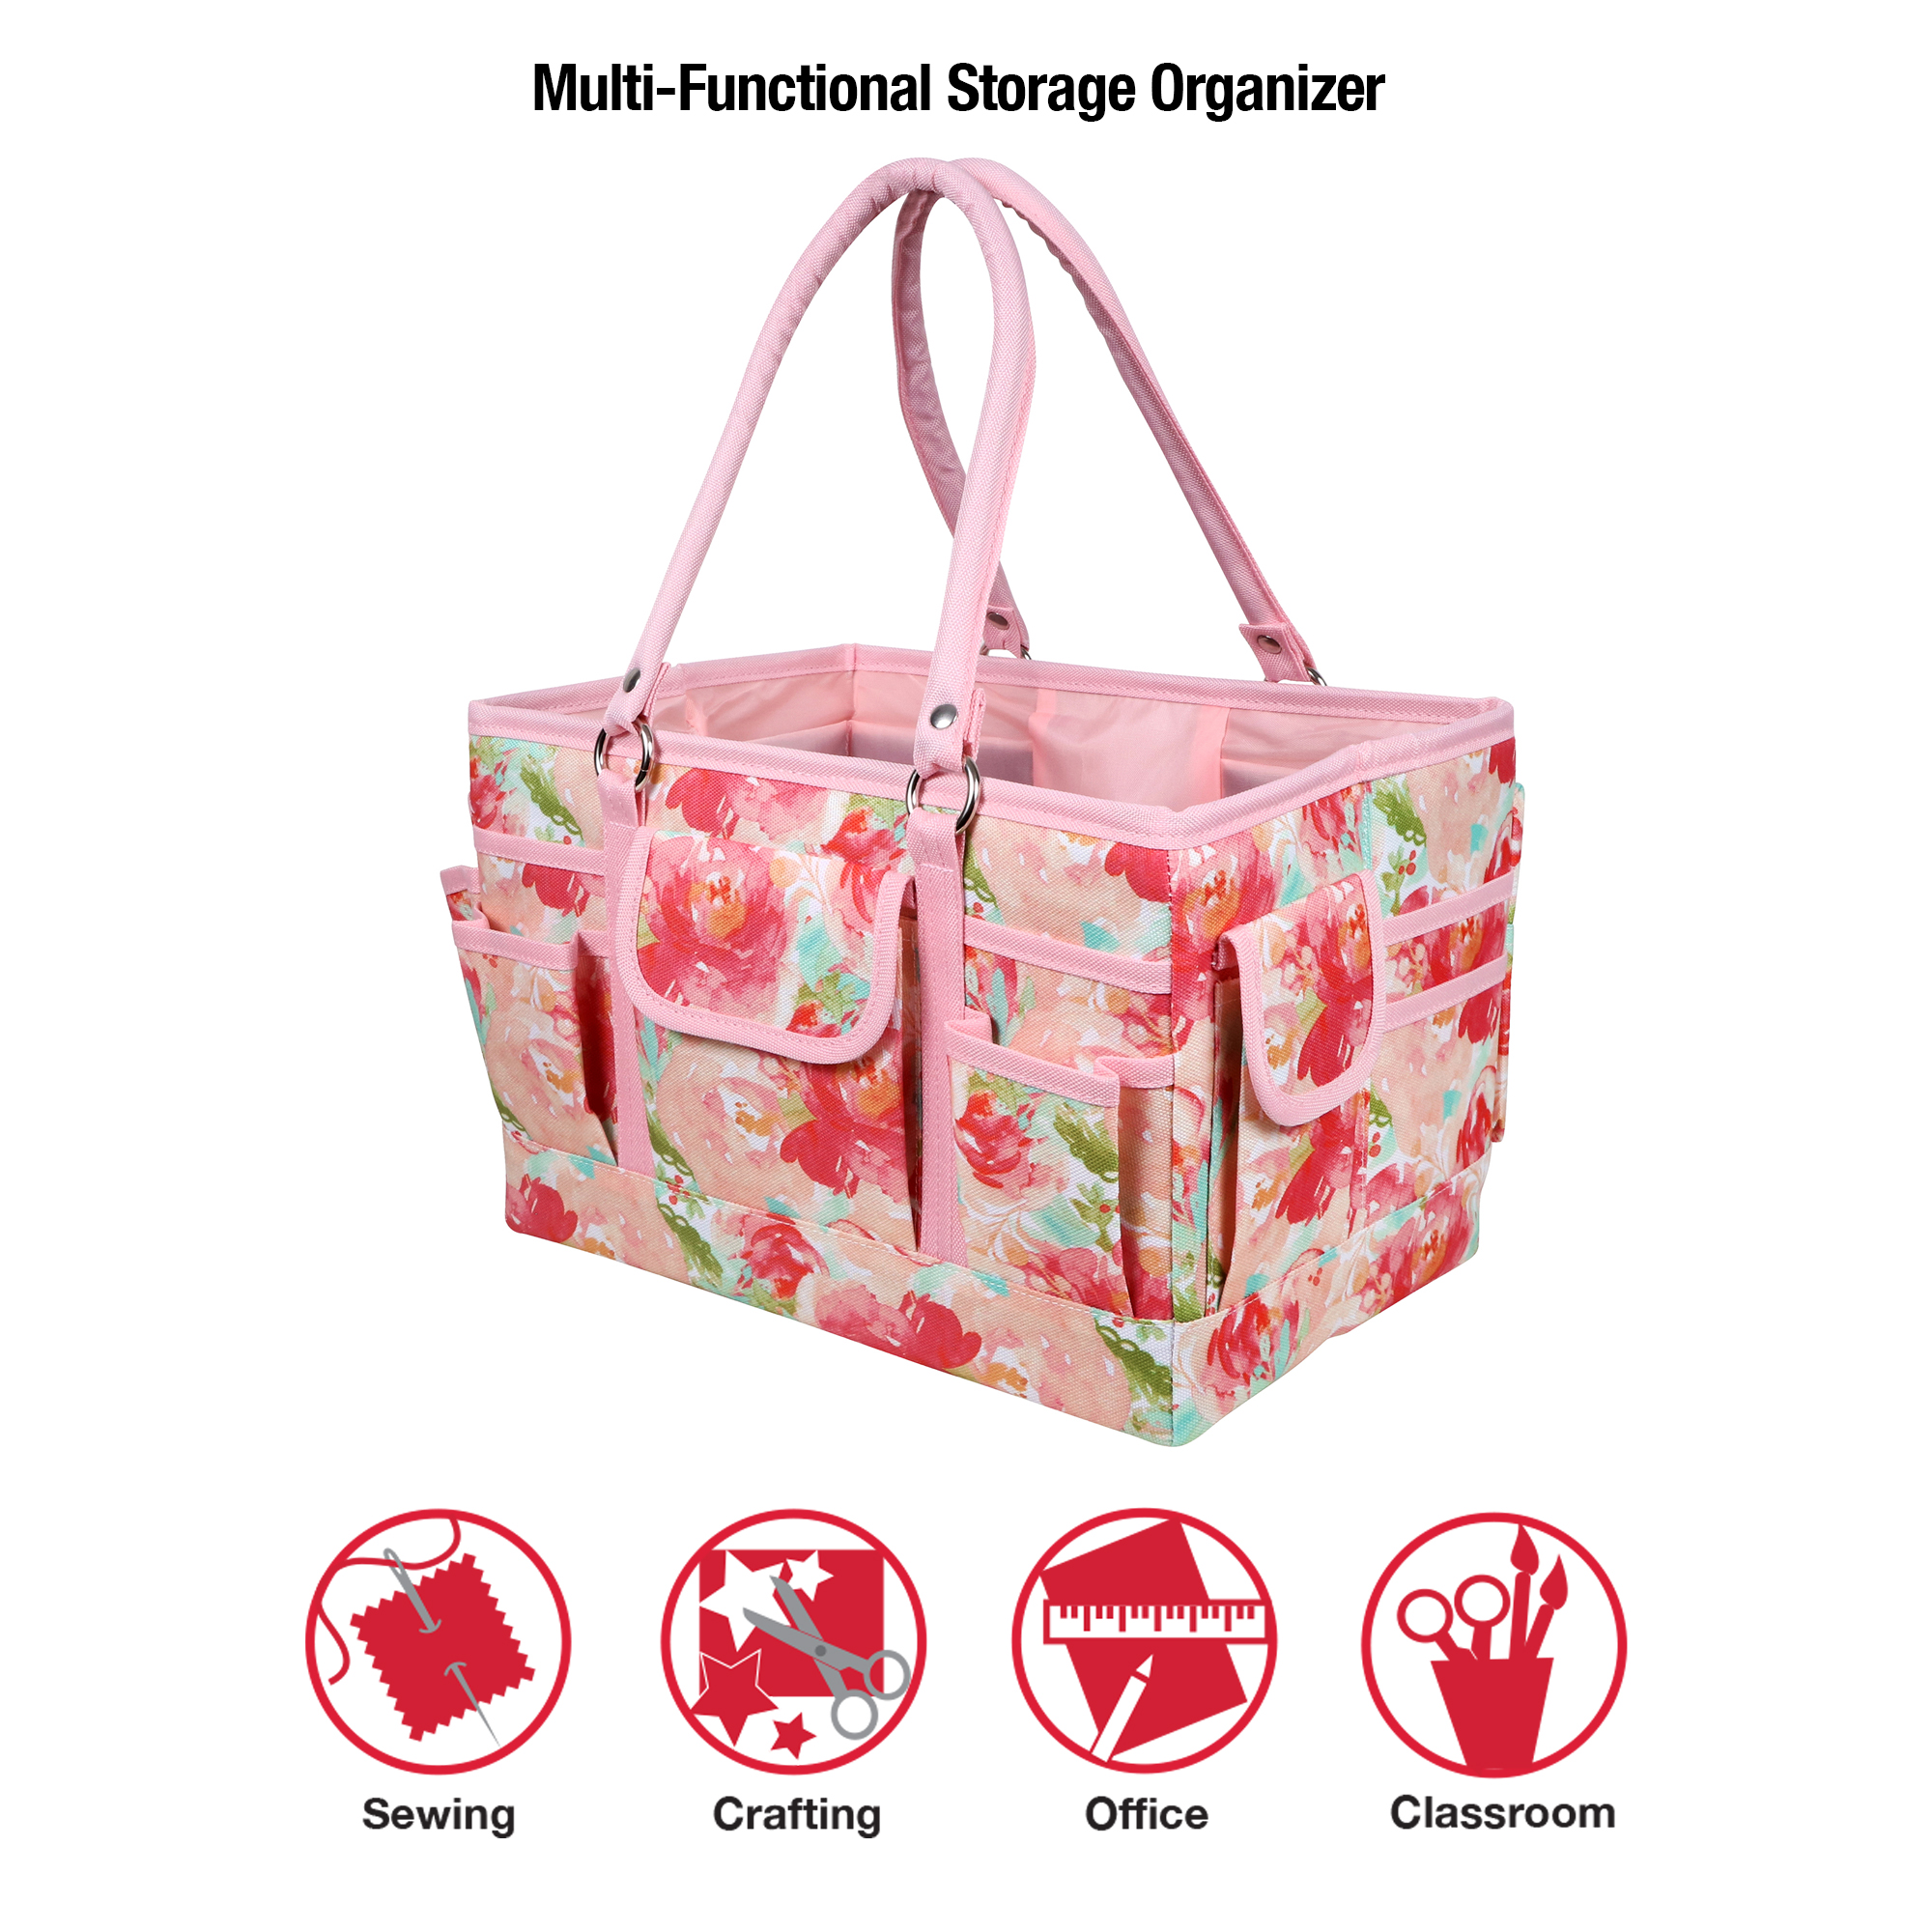 SINGER Sewing Storage Organizer Collapsible Tote Caddy, Craft Storage, Watercolor Floral Print, 1 Count - image 3 of 13